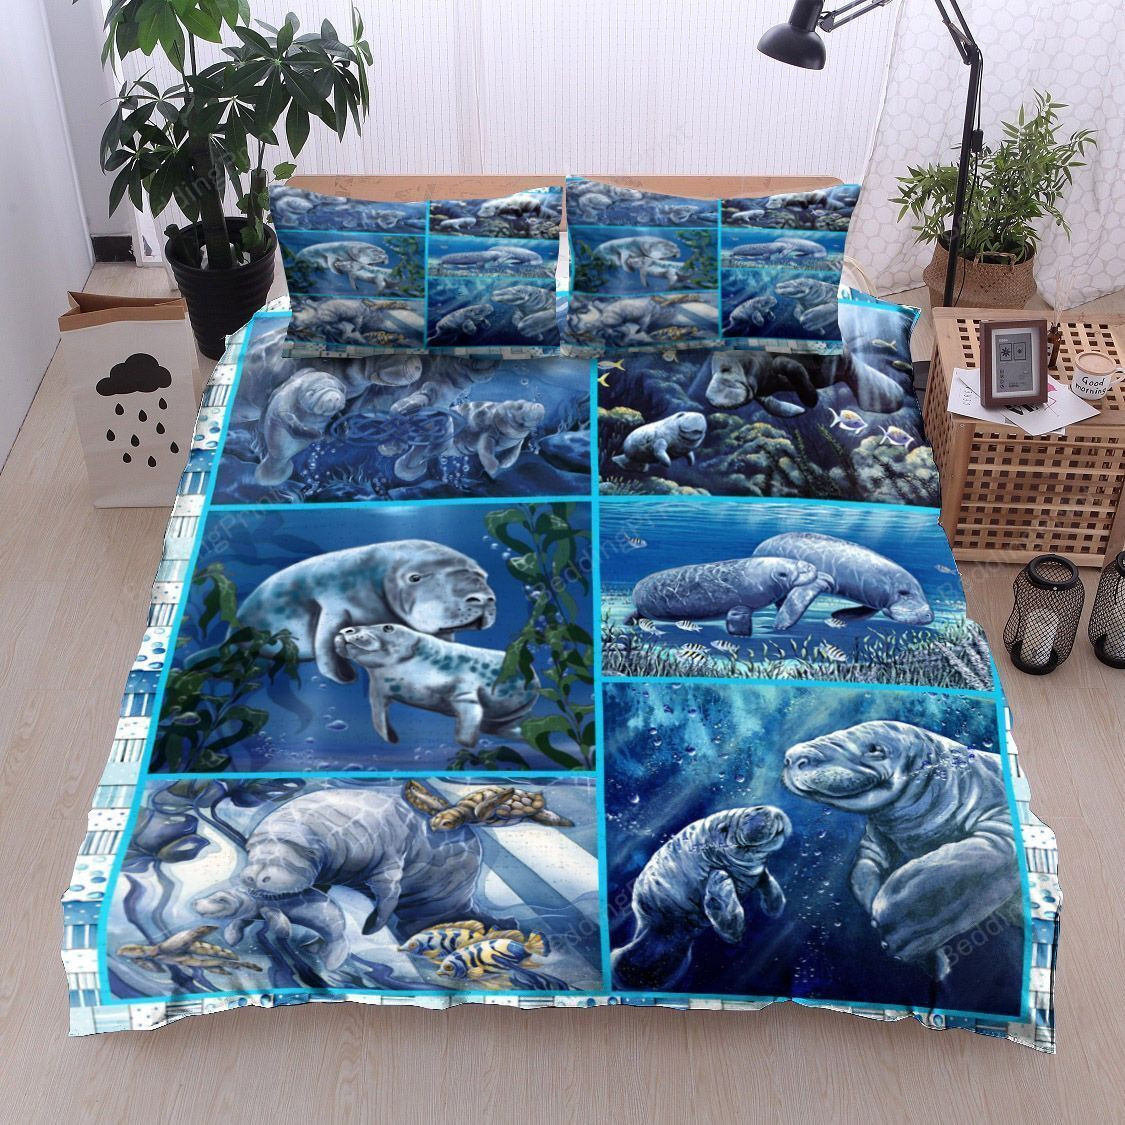 Manatee Bed Sheets Duvet Cover Bedding Sets